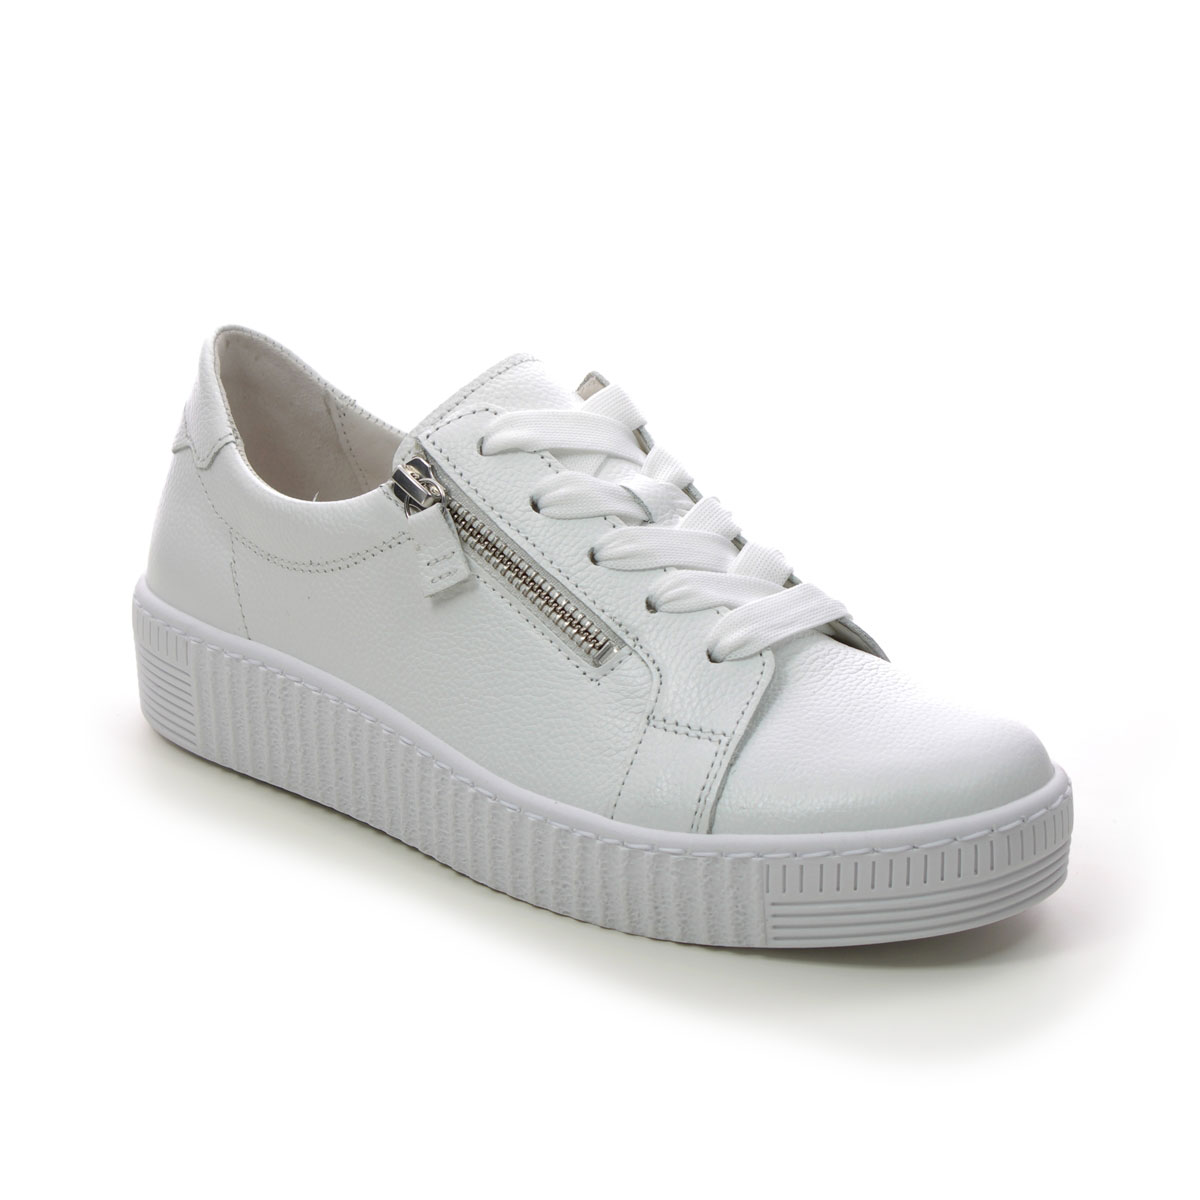 Gabor Wisdom White Leather Womens Trainers 23.334.21 In Size 3.5 In Plain White Leather  Womens Trainers In Soft White Leather Leather